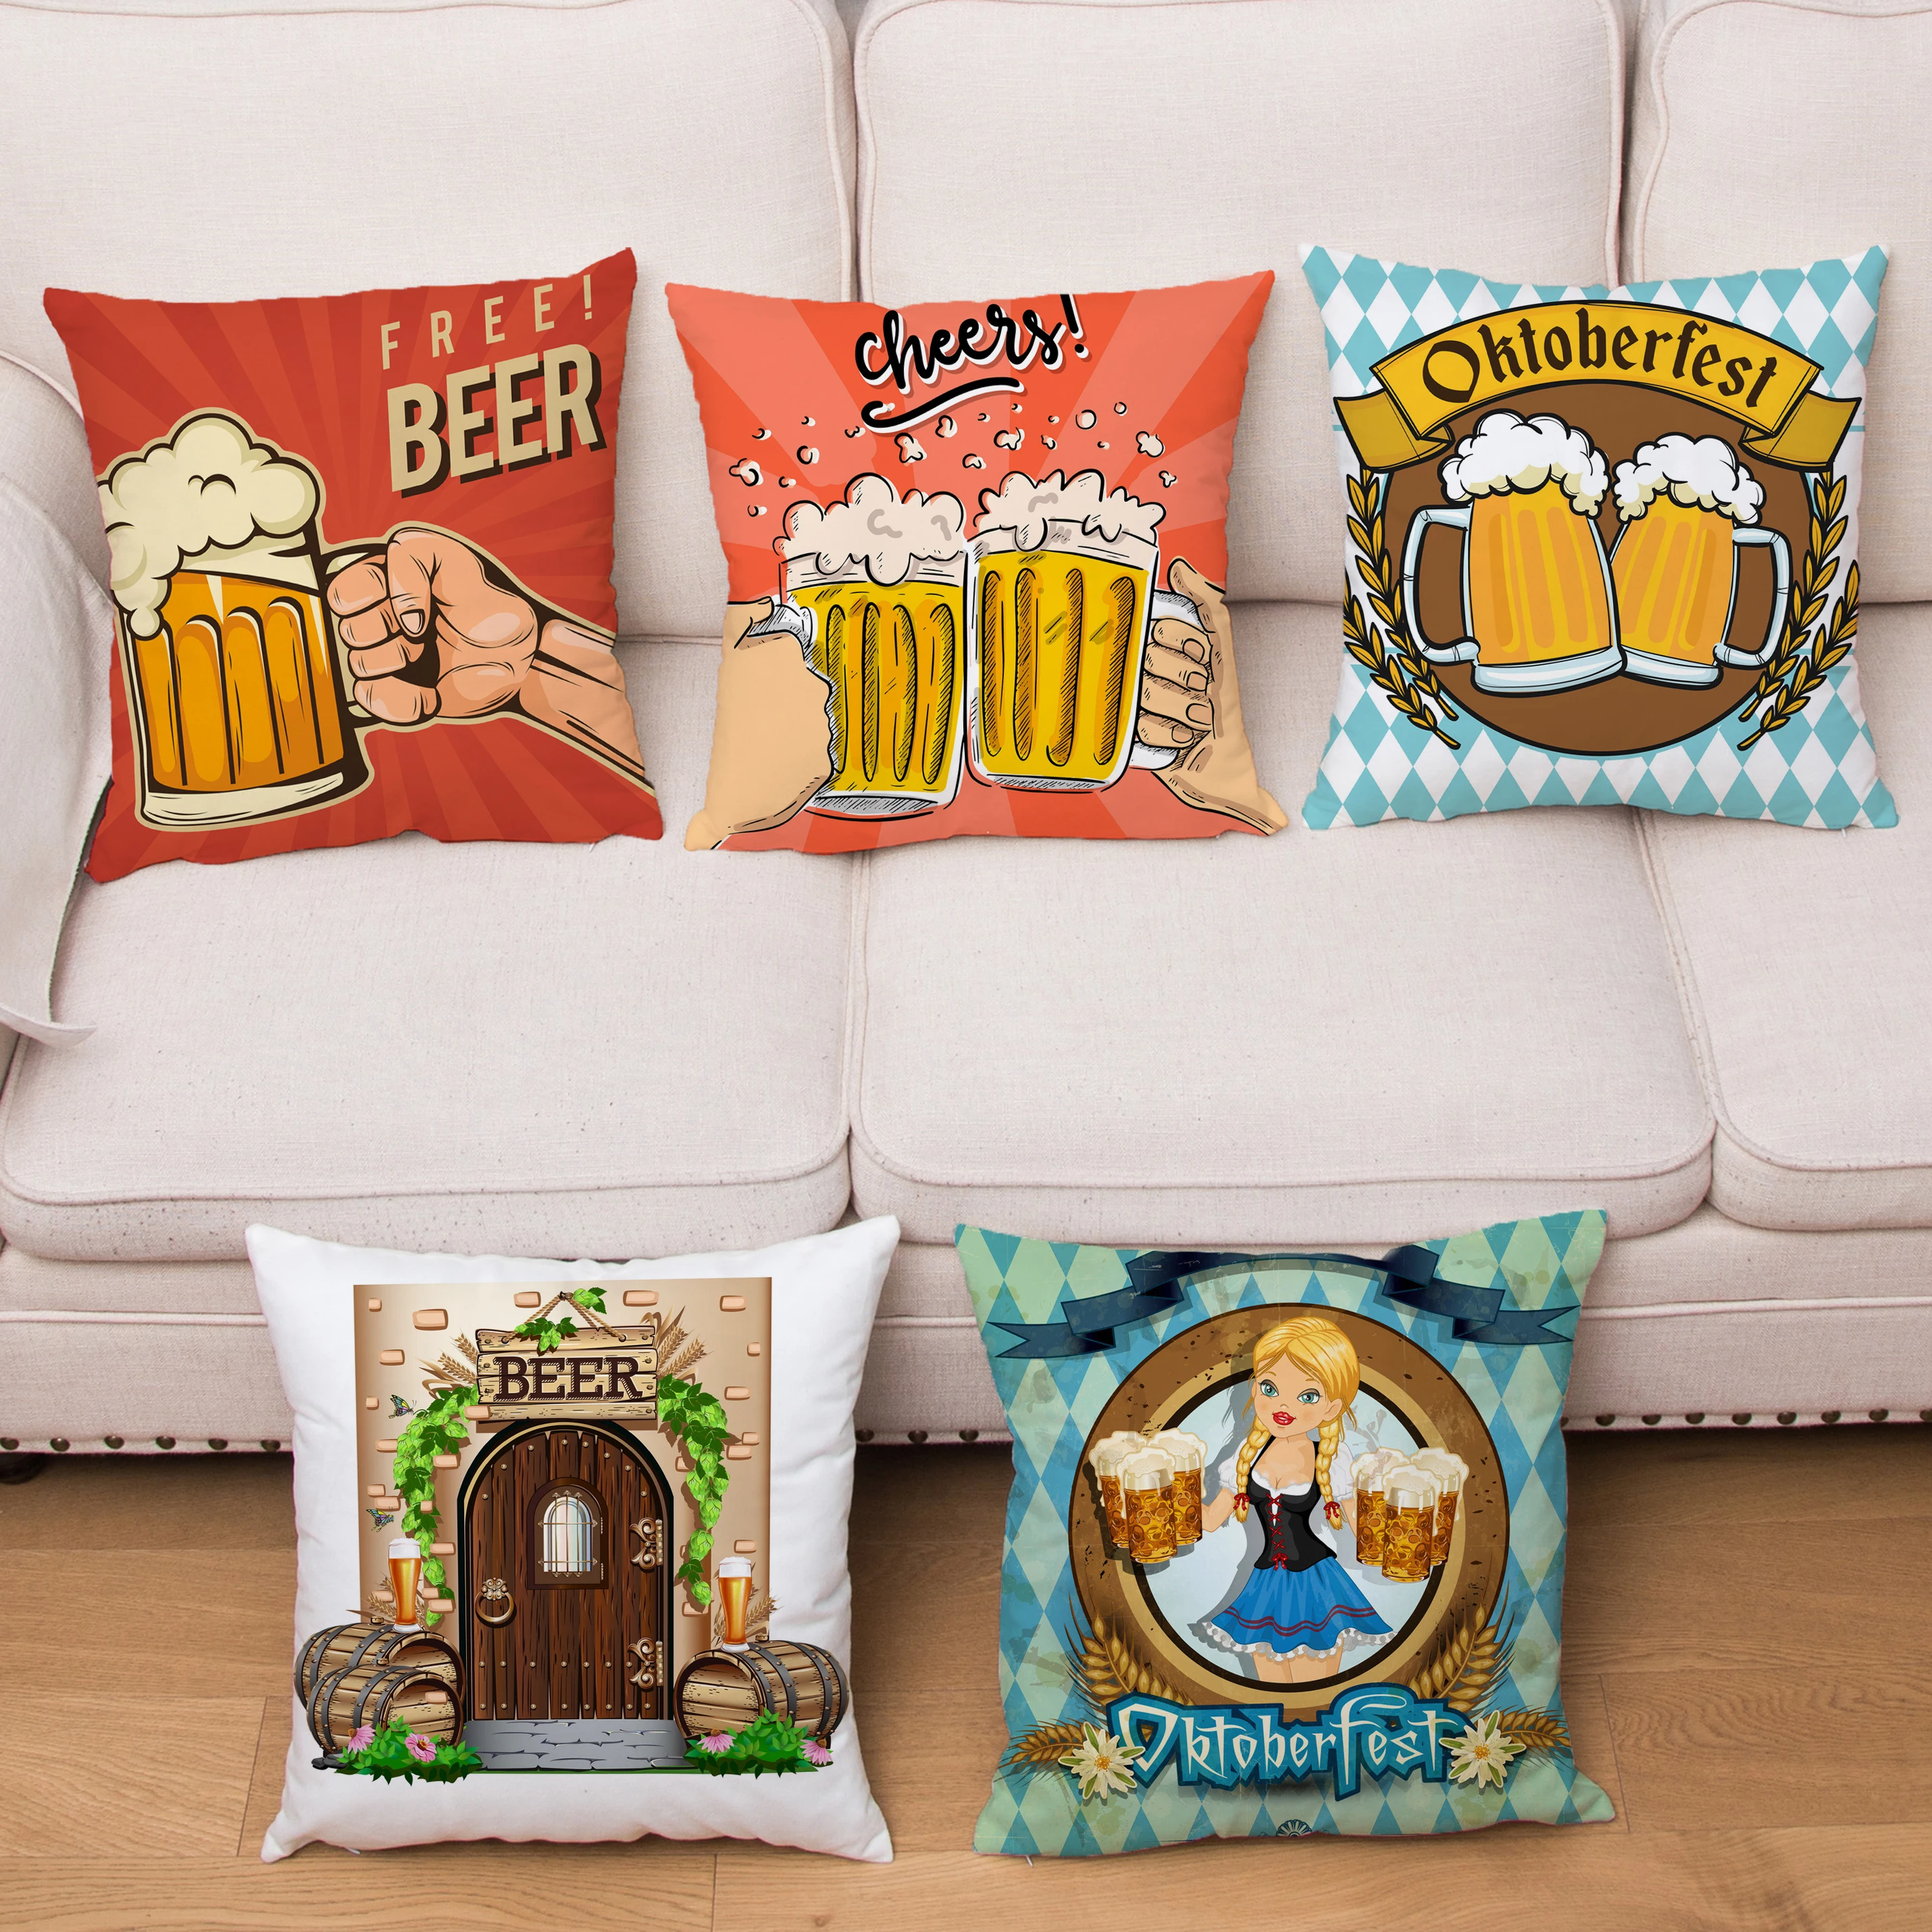 

Vintage Cheers Beer Wine Cushion Cover Super Soft Short Plush Pillow Covers Fashion Home Decor Pillows Cases Throw Pillowcase